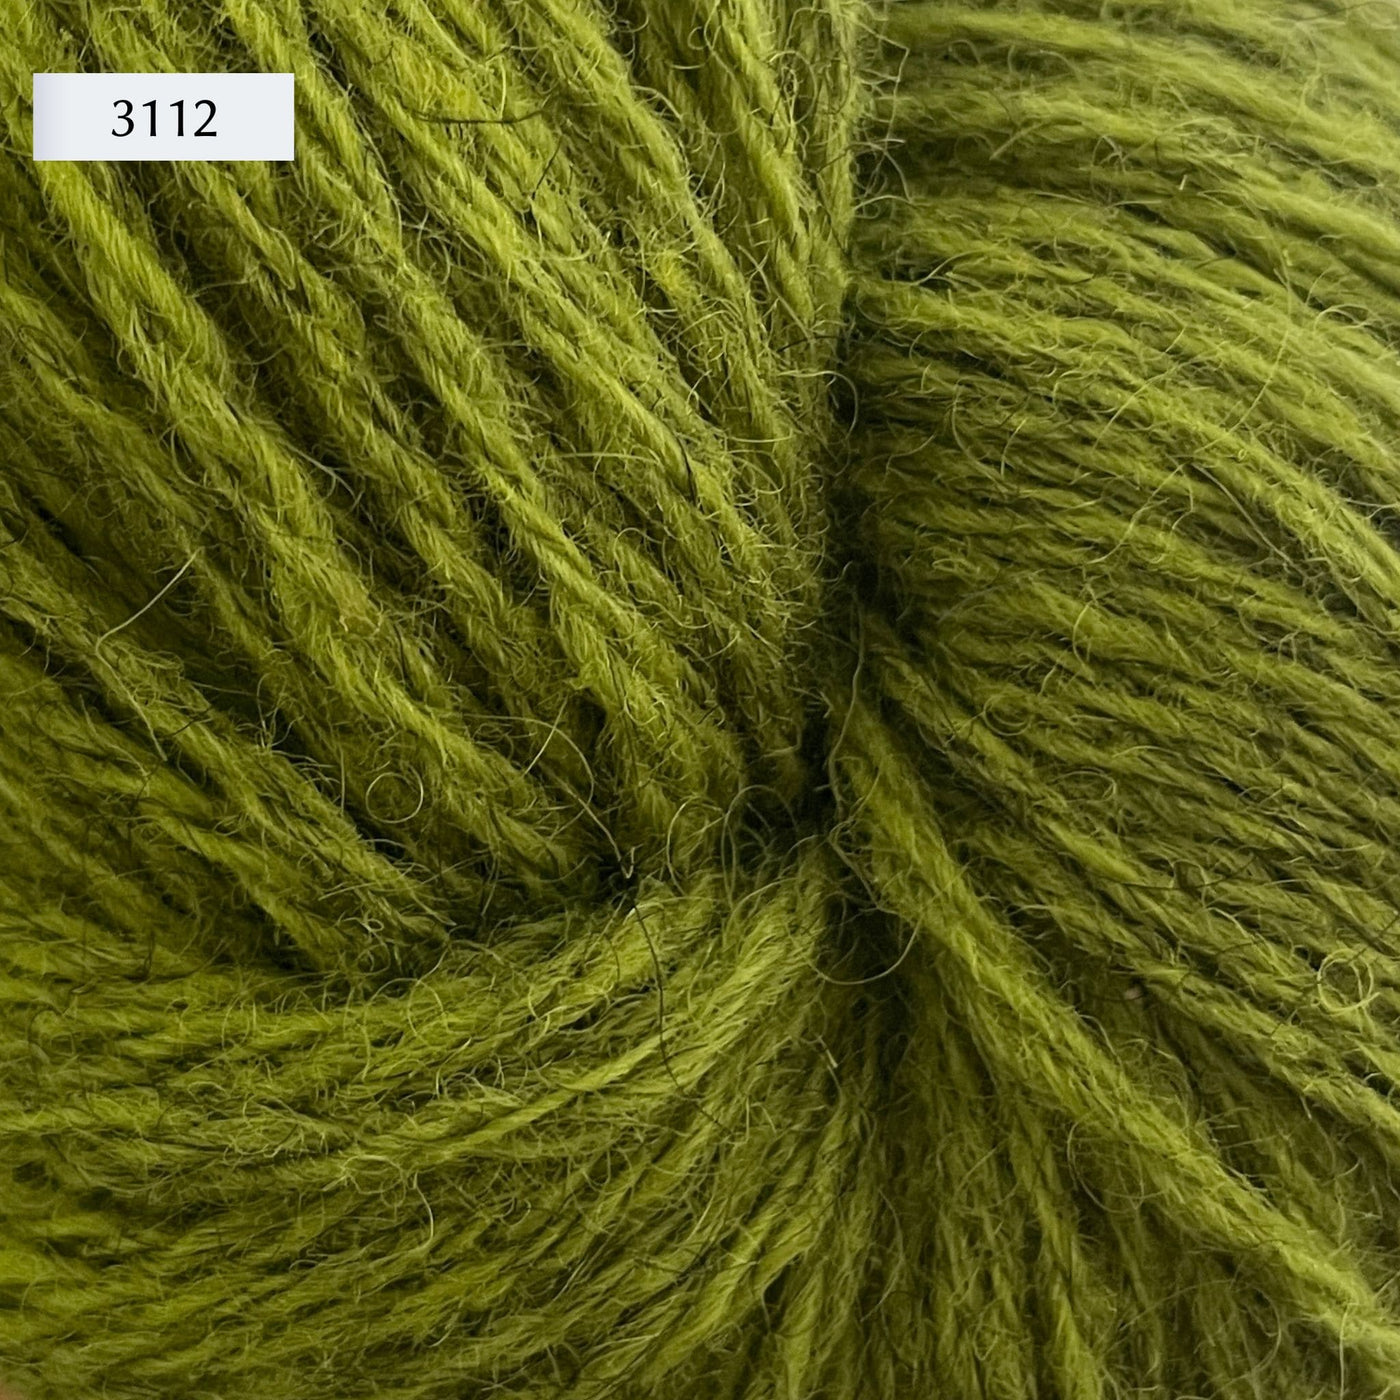 Ullcentrum 3ply, a worsted weight wool yarn, in color 3112, a bright grass green